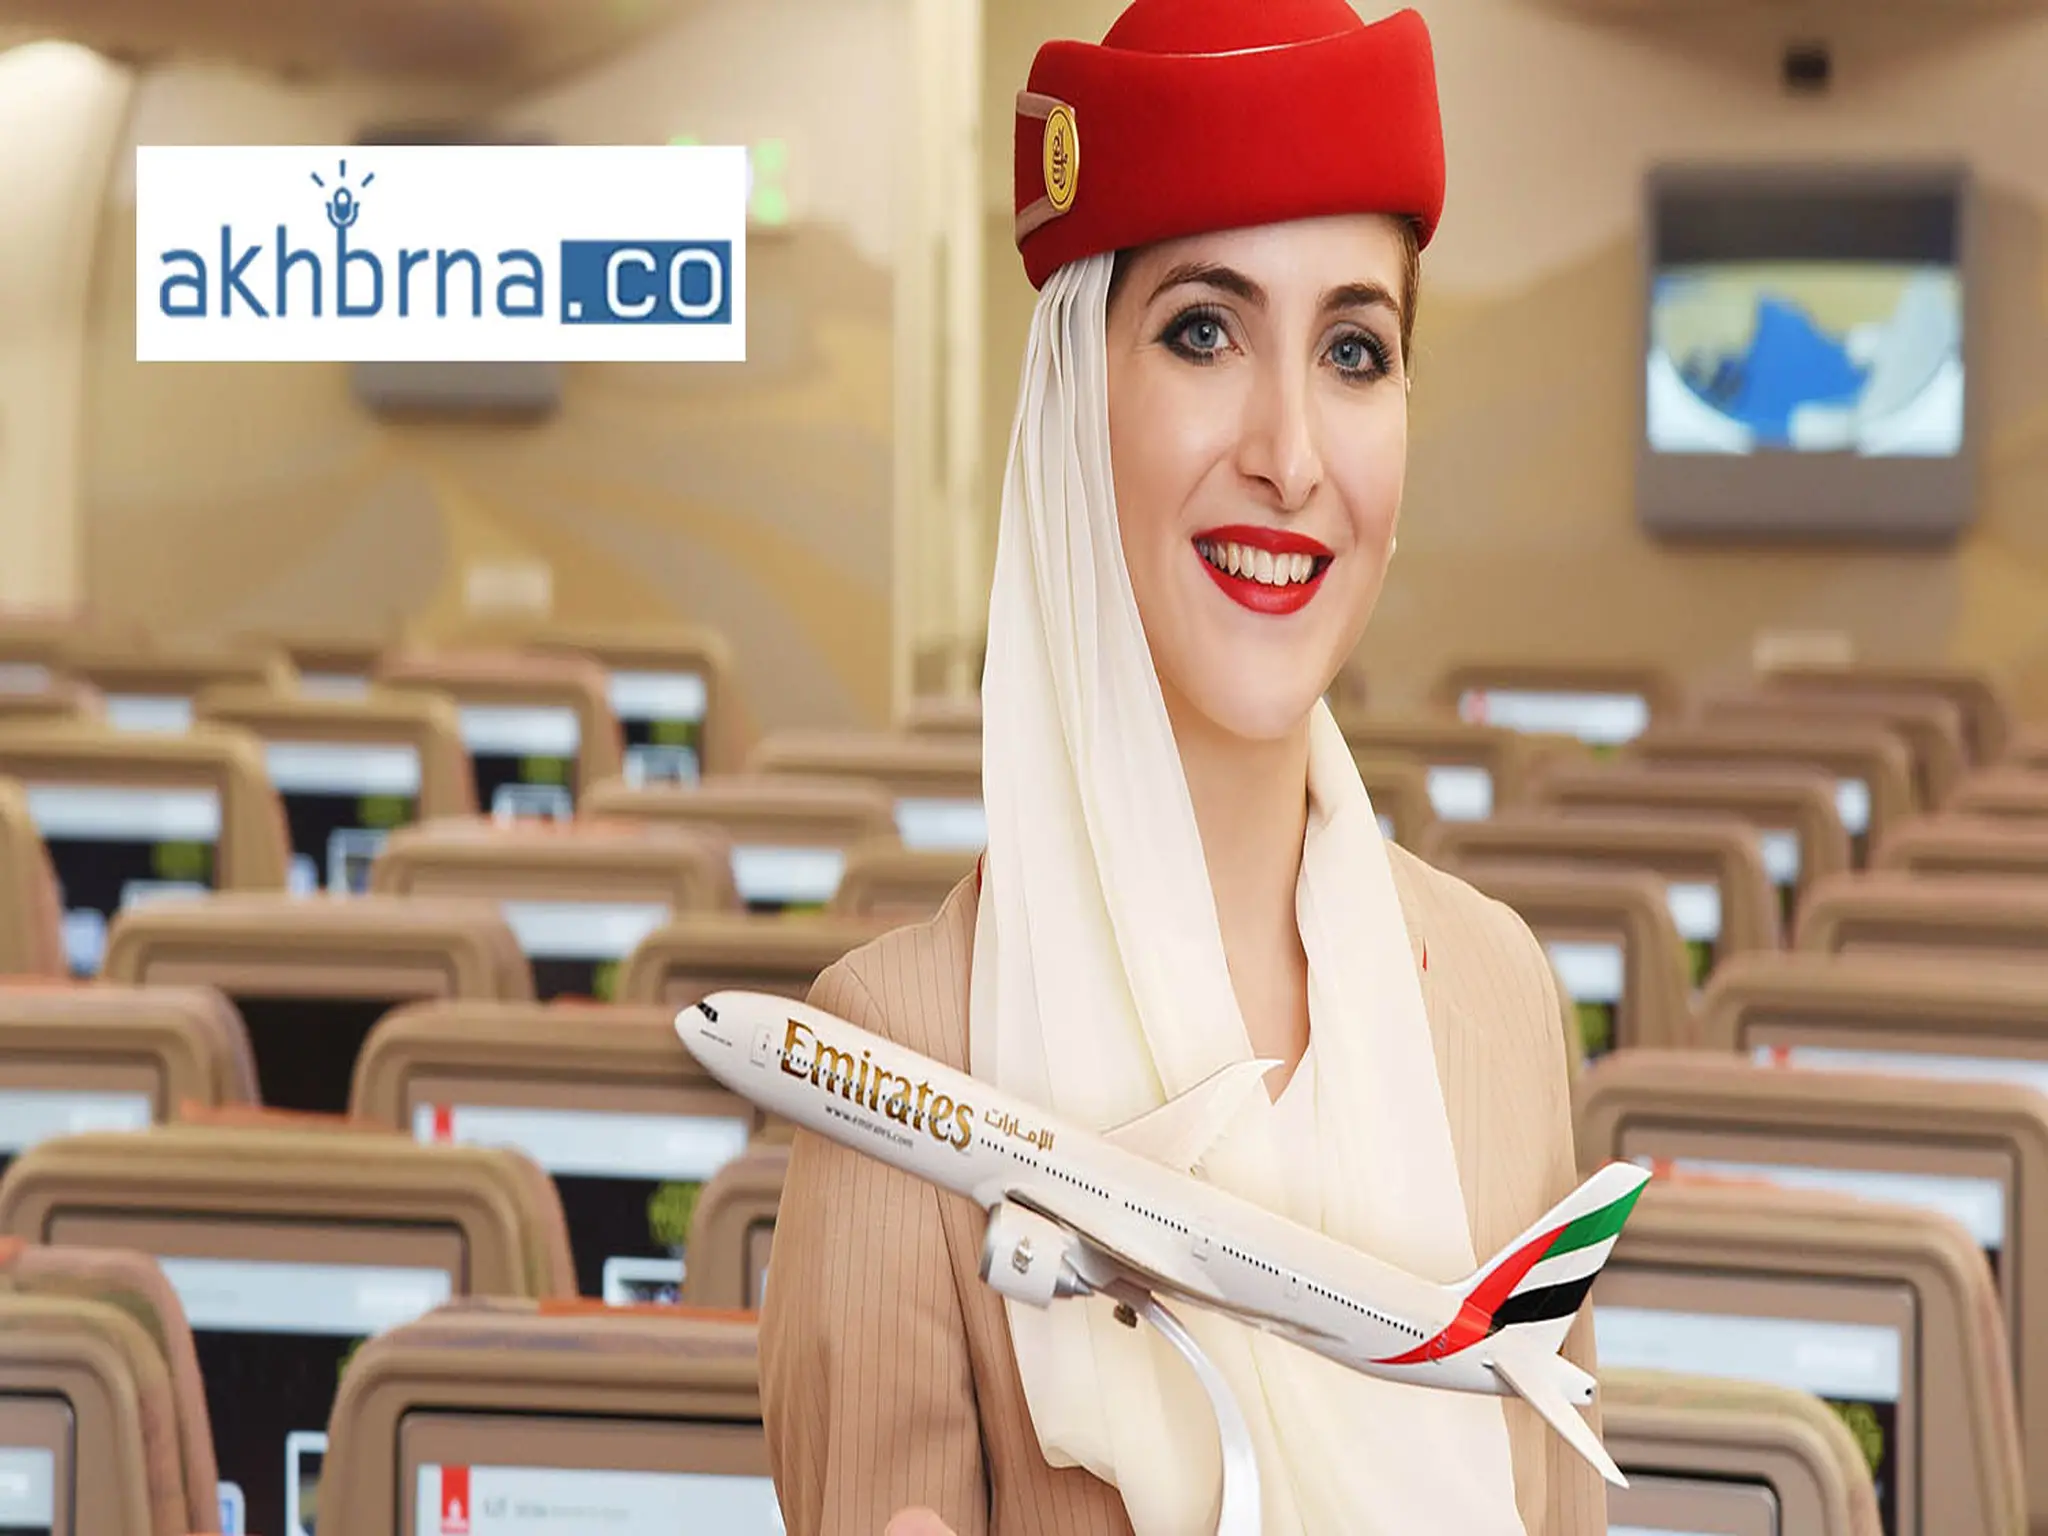 Severe penalties announced by Emirates Airlines to deal with rioting passengers